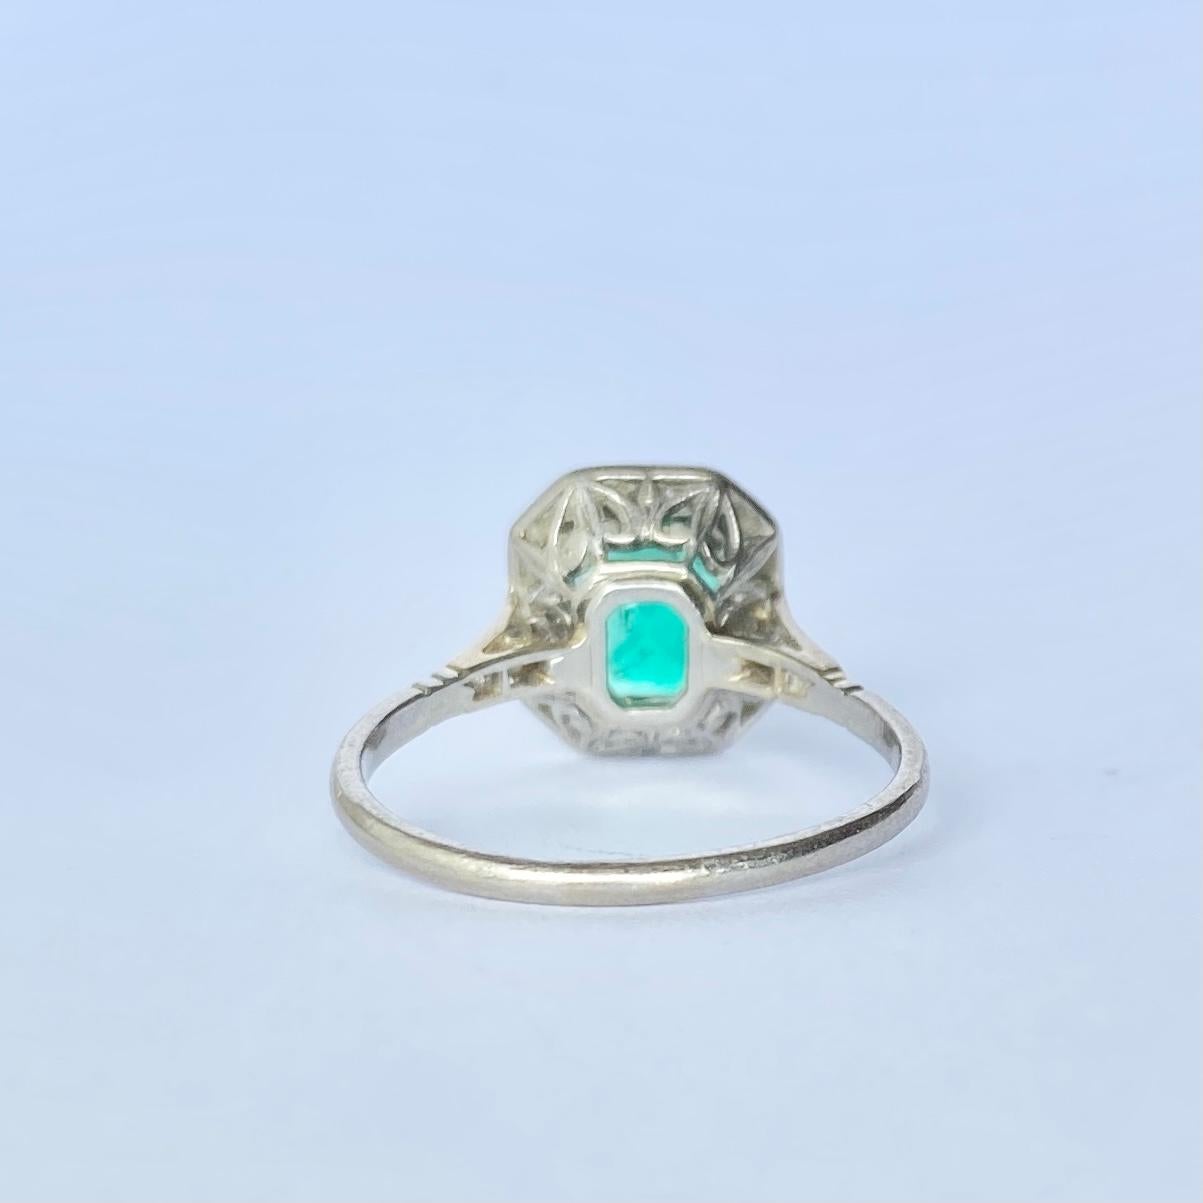 A superb antique Art Deco panel ring centrally set with a classic emerald-cut 75pt green emerald. The emerald is bordered by shimmering white diamonds totalling aprox 40pts. 

Ring Size: L 1/2 or 6
Panel Dimensions: 11x9.5mm

Weight: 3.1g